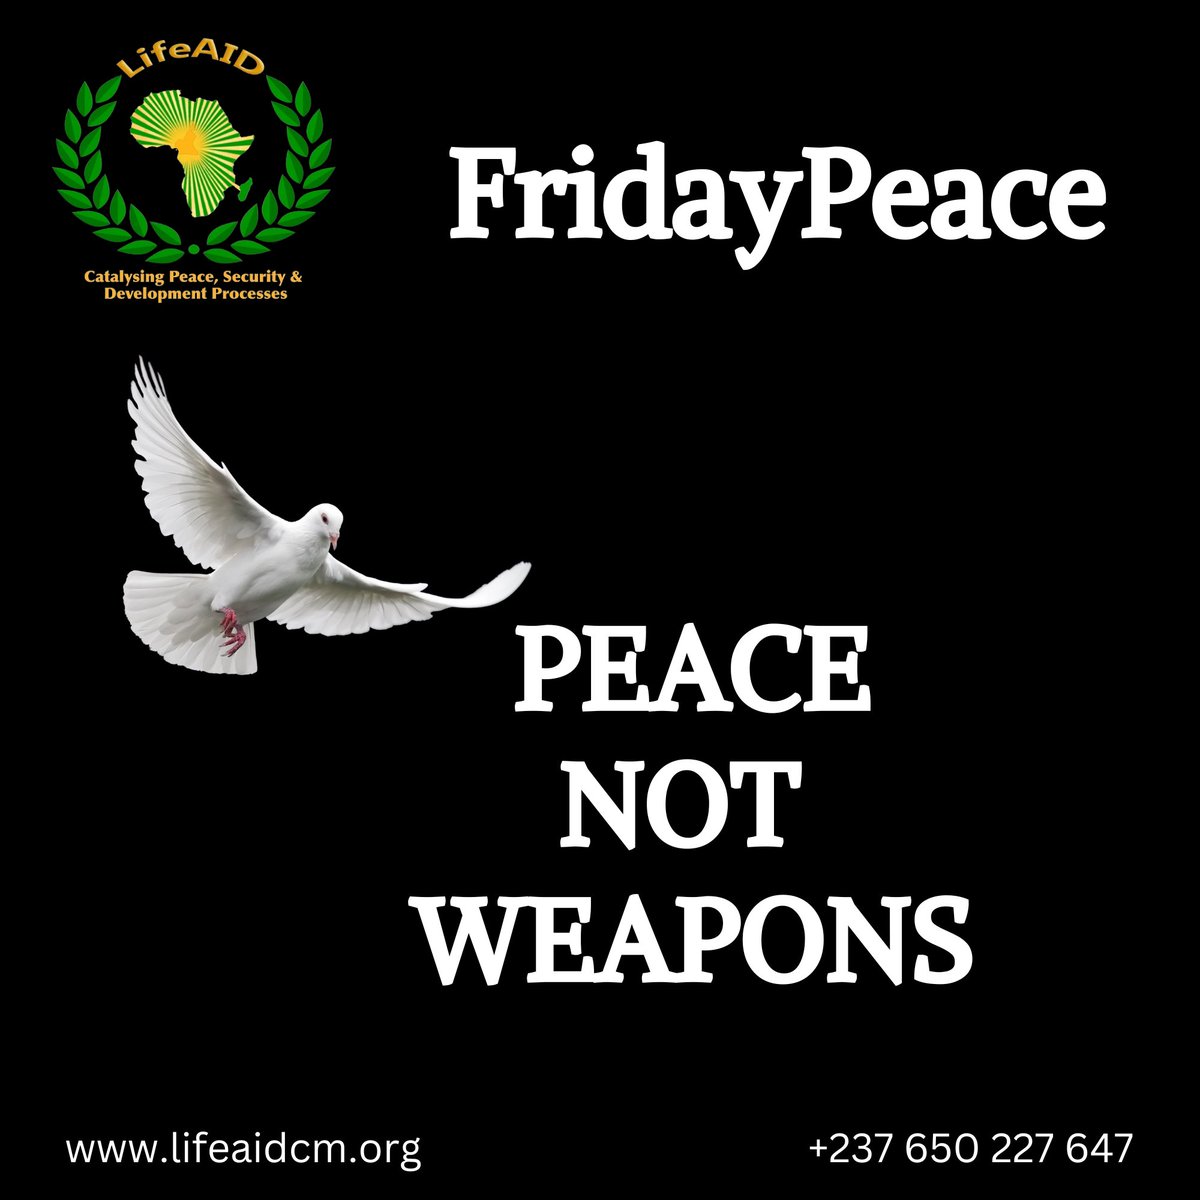 Drop your #FridayPeace statement for this weekend.
Lets be intentional about #Peace 
@UNOCA_NEWS @CEEAC_ECCAS @UNDPPA